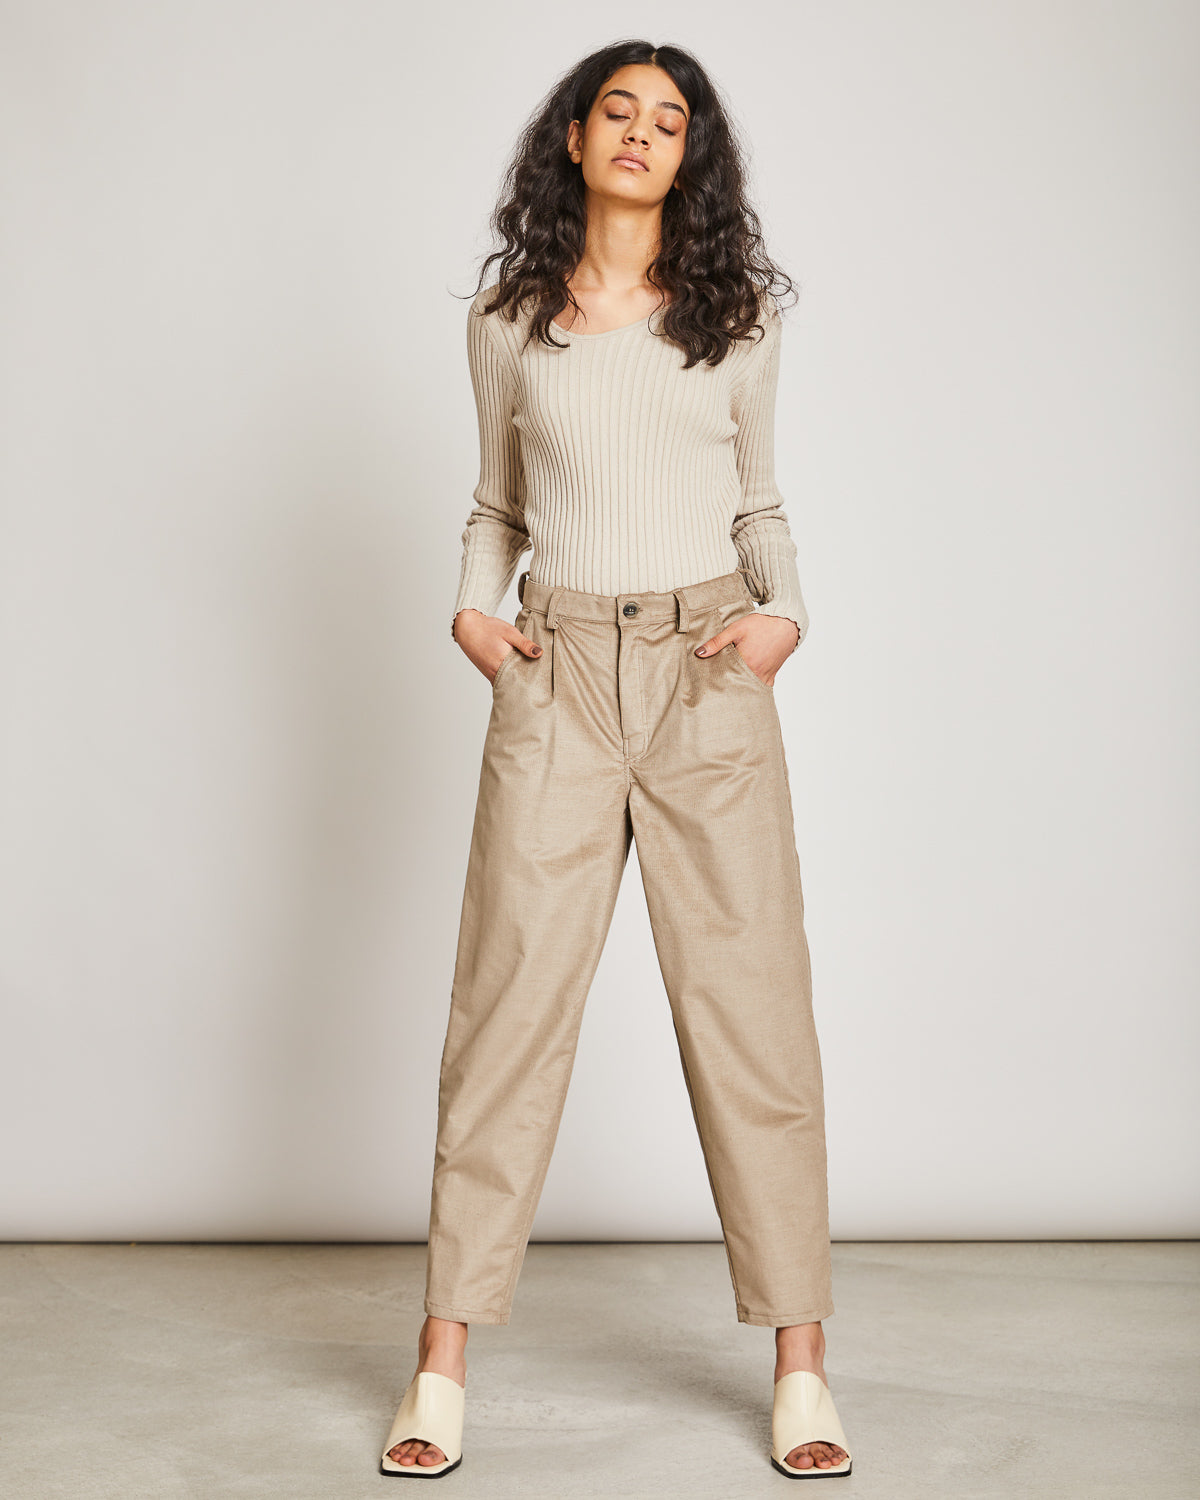 http://shopthecurate.com/cdn/shop/products/JanNJune_mom-pants-hedda-corduroy-dark-ivory_Curate-shopthecurate_Sustainable-ethical-clothing_01.jpg?v=1634847163